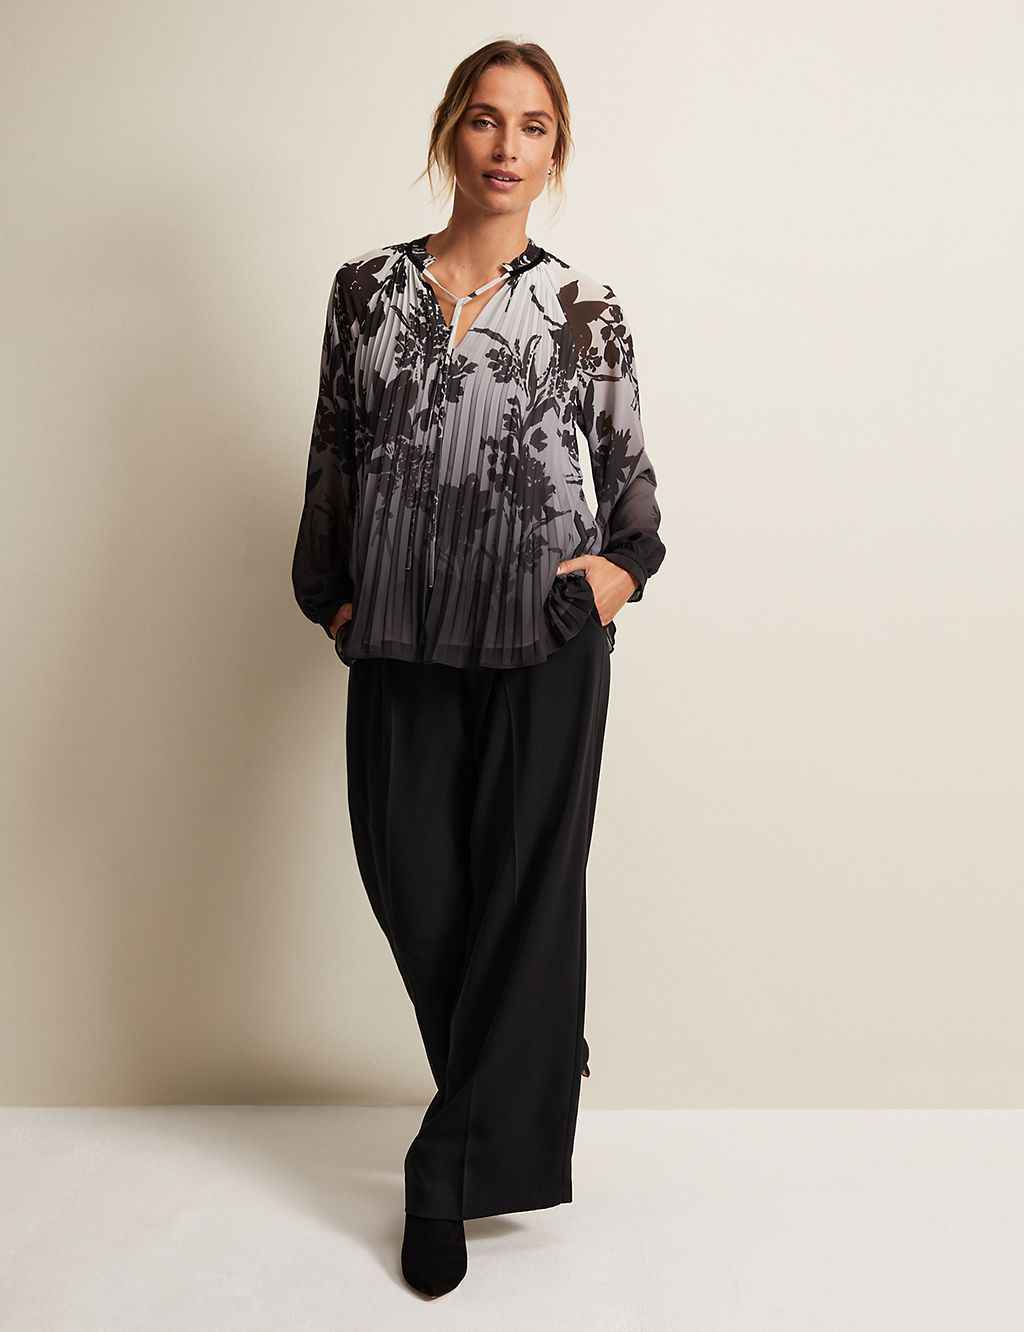 Floral Pleated Tie Neck Top | Phase Eight | M&S